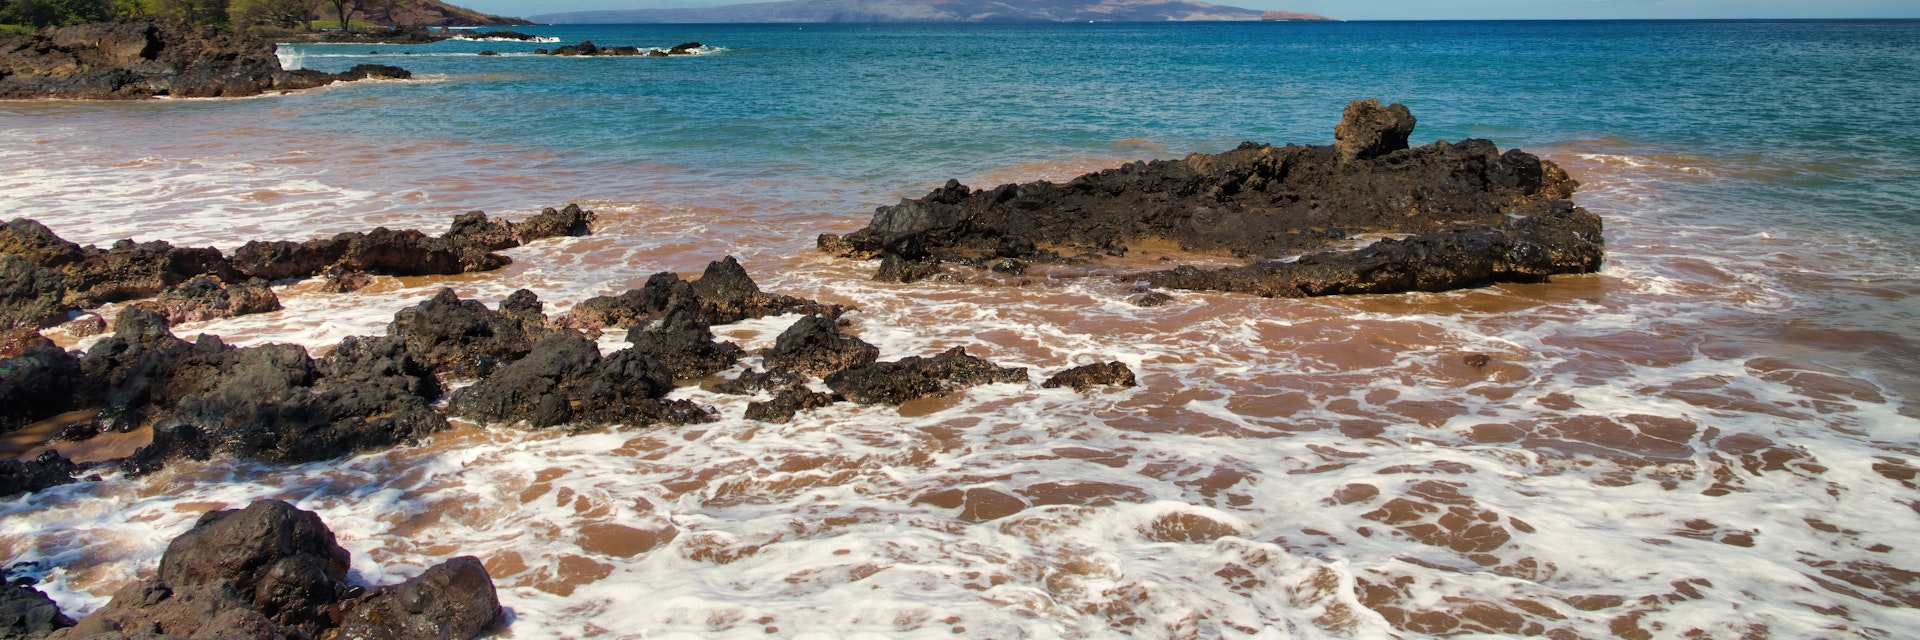 View from Makena Bay out to Kaoolawe on Maui.